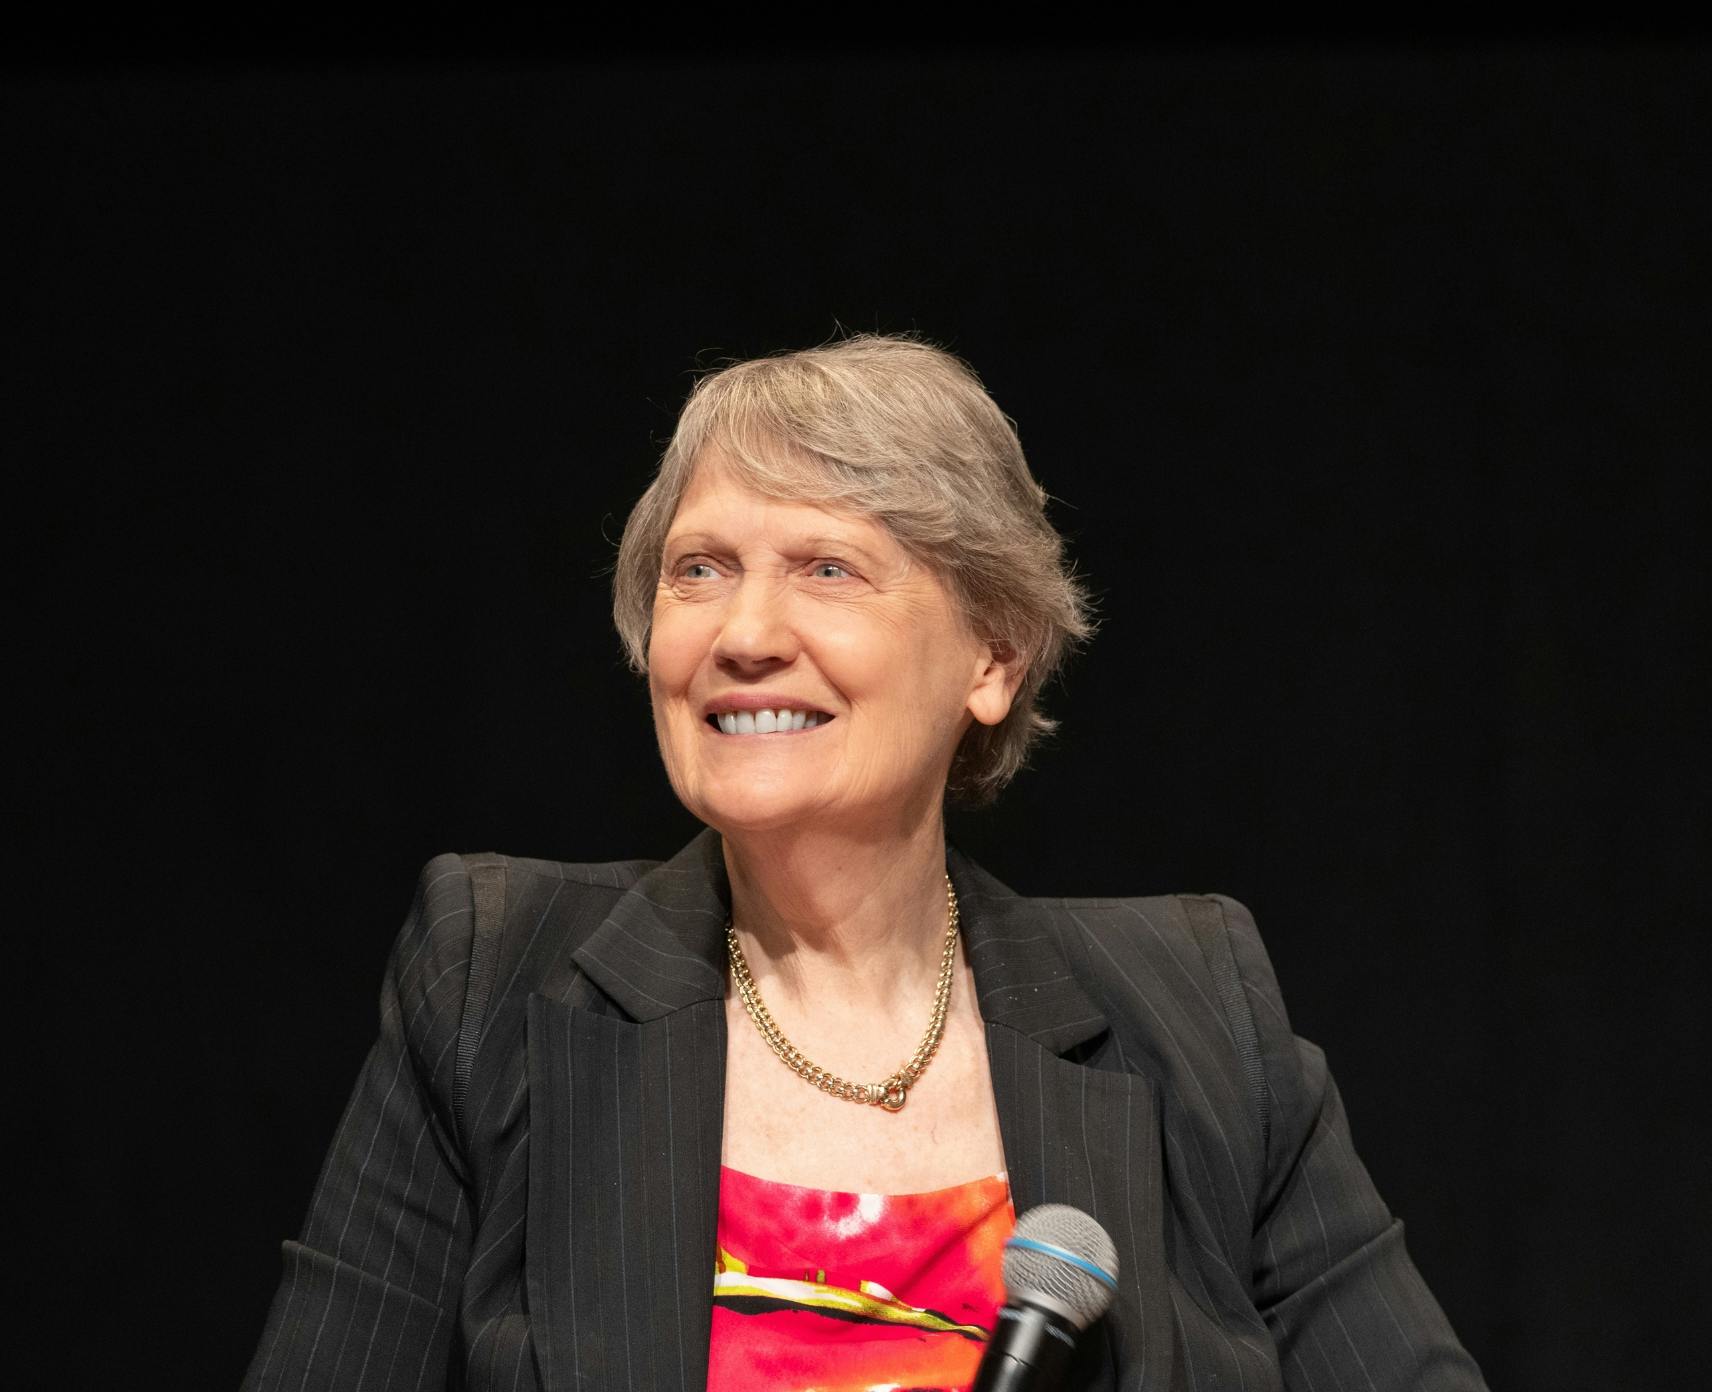 The right honourable Helen Clark seated to discuss health security at ANU